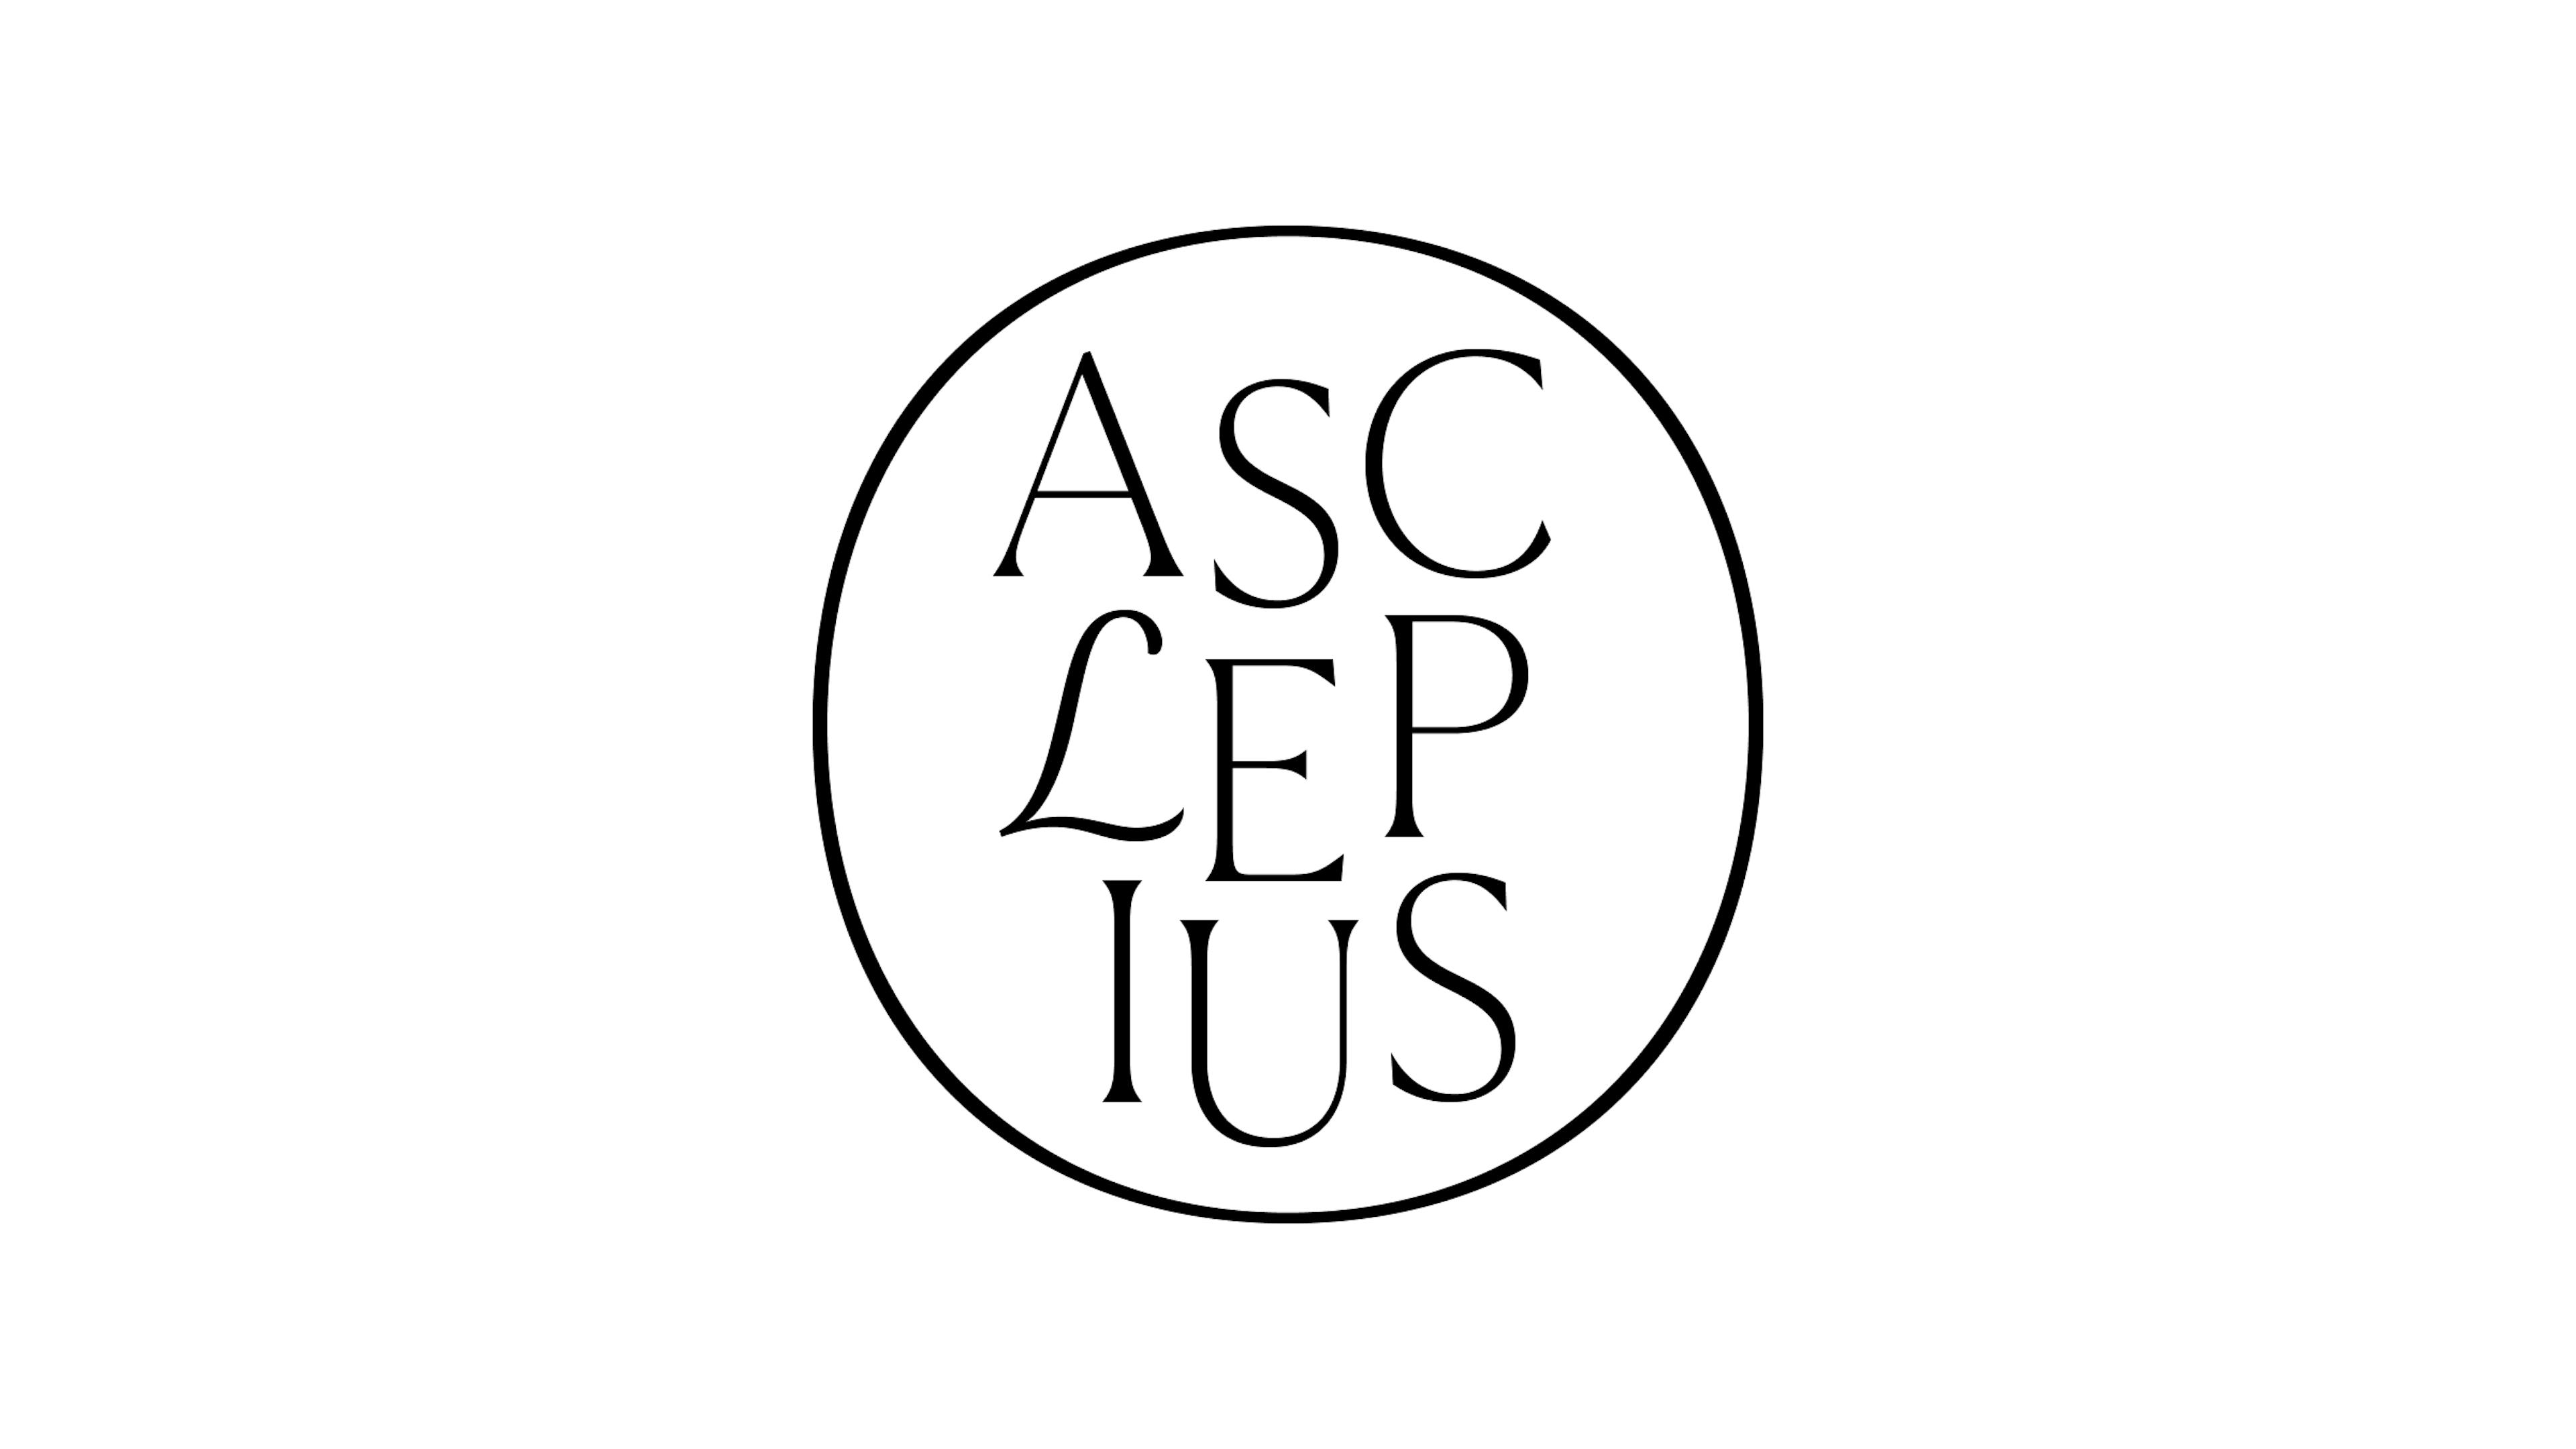 asclepius-badge-concept